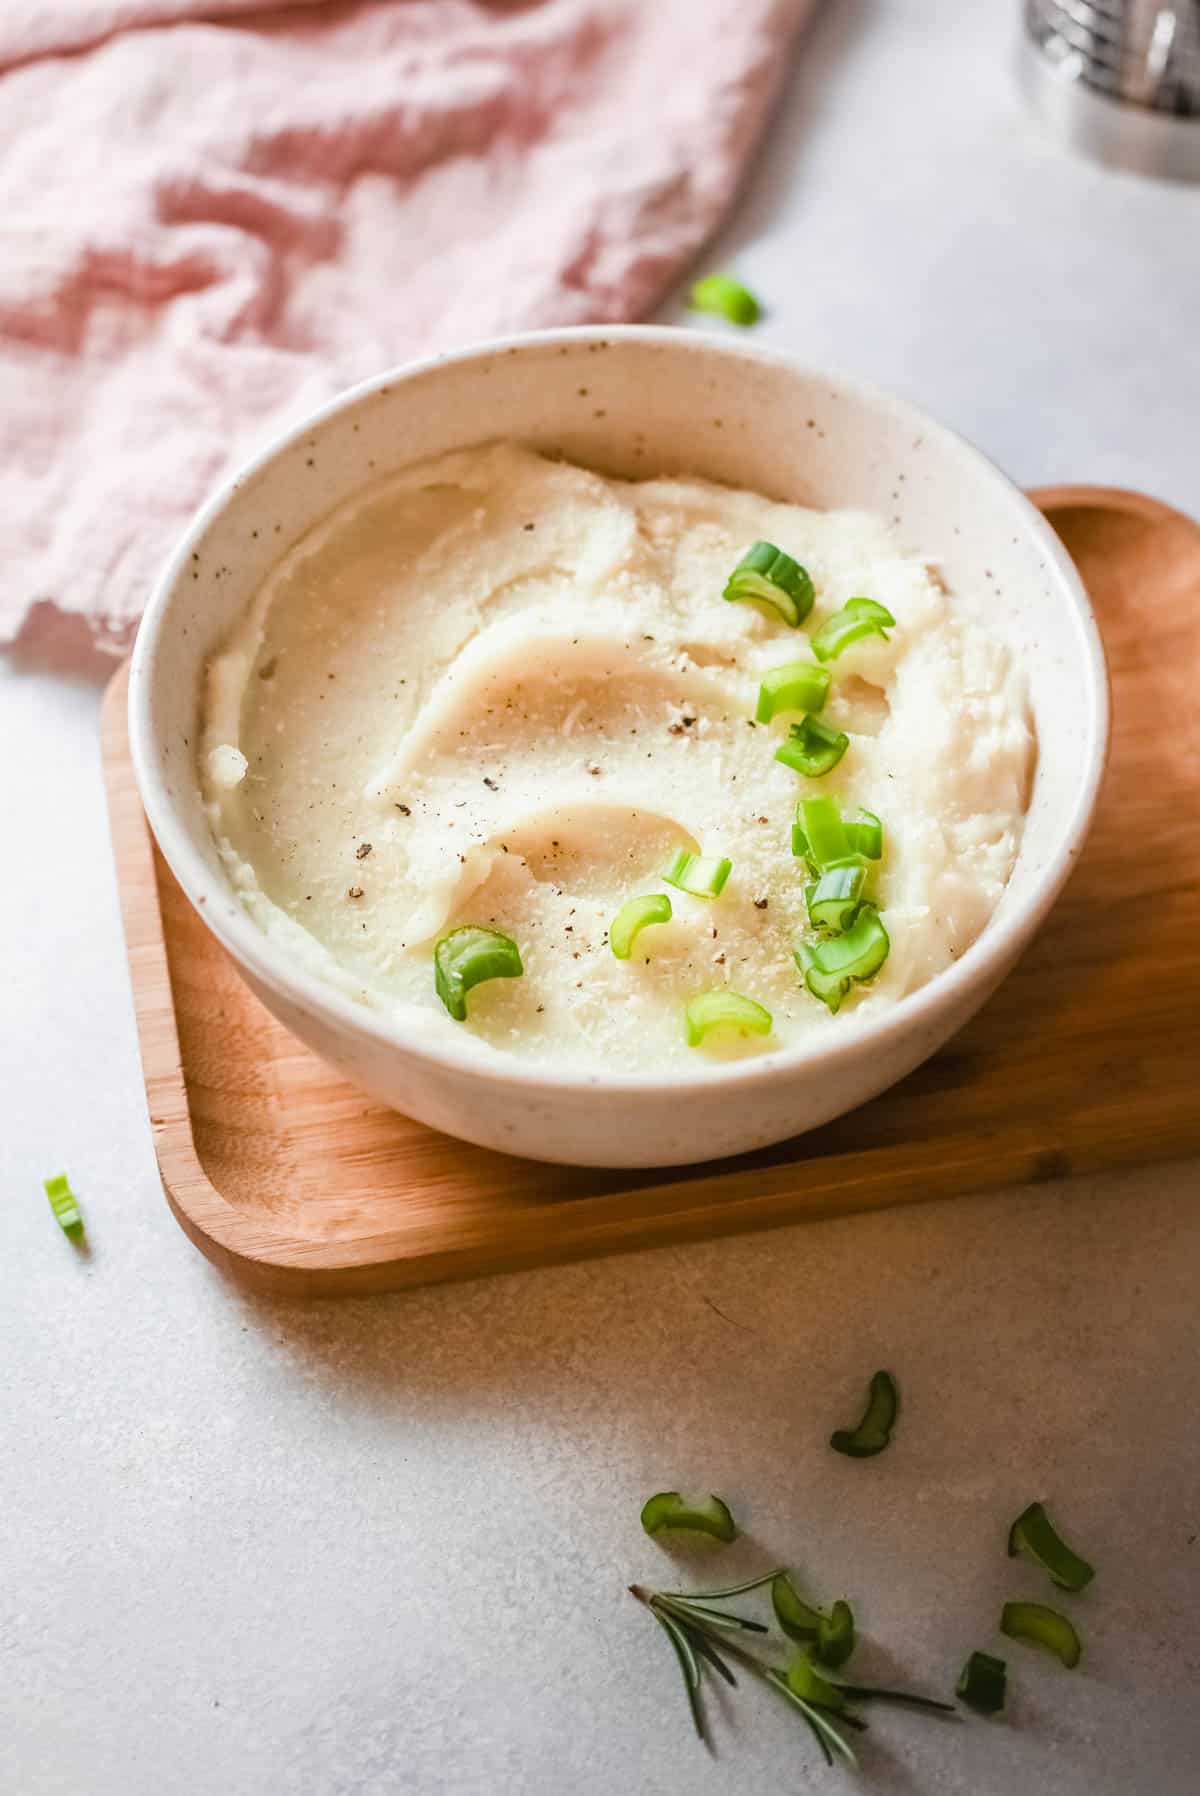 the completed garlic mashed potatoes recipe